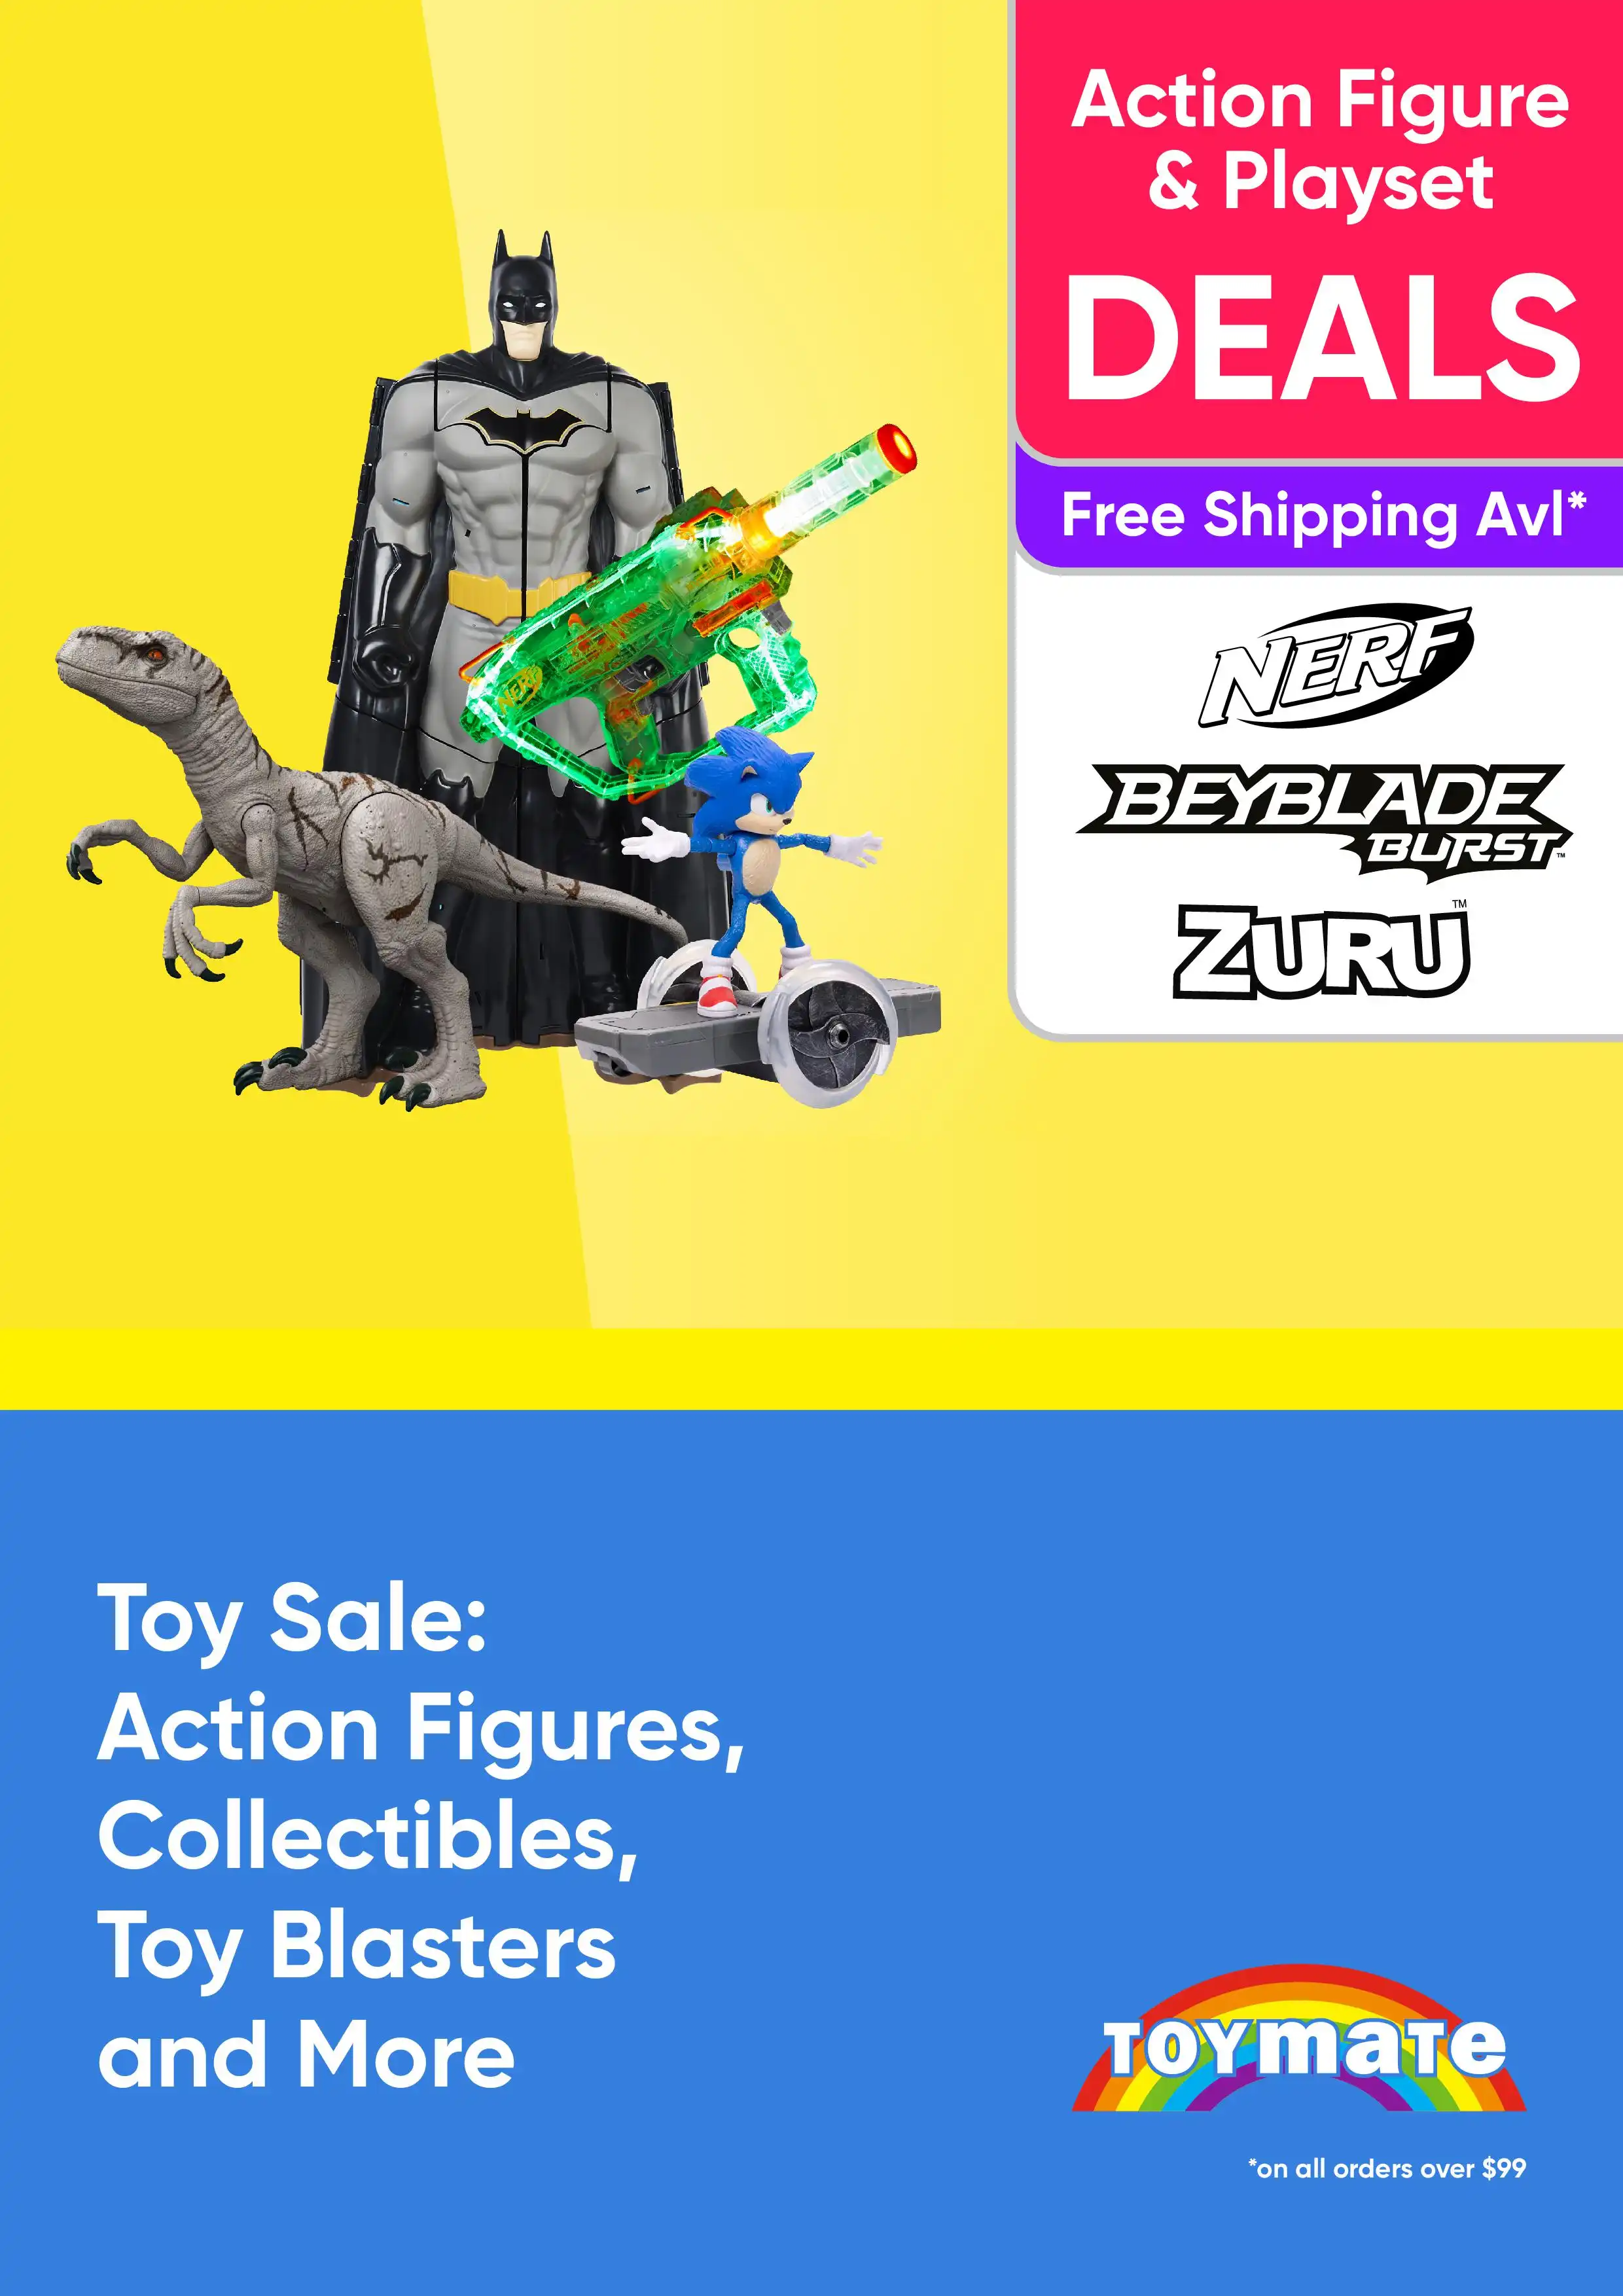 Toy Sale: Action Figures, Collectibles, Toy Blasters and More - Nerf, Beyblade, Zuru